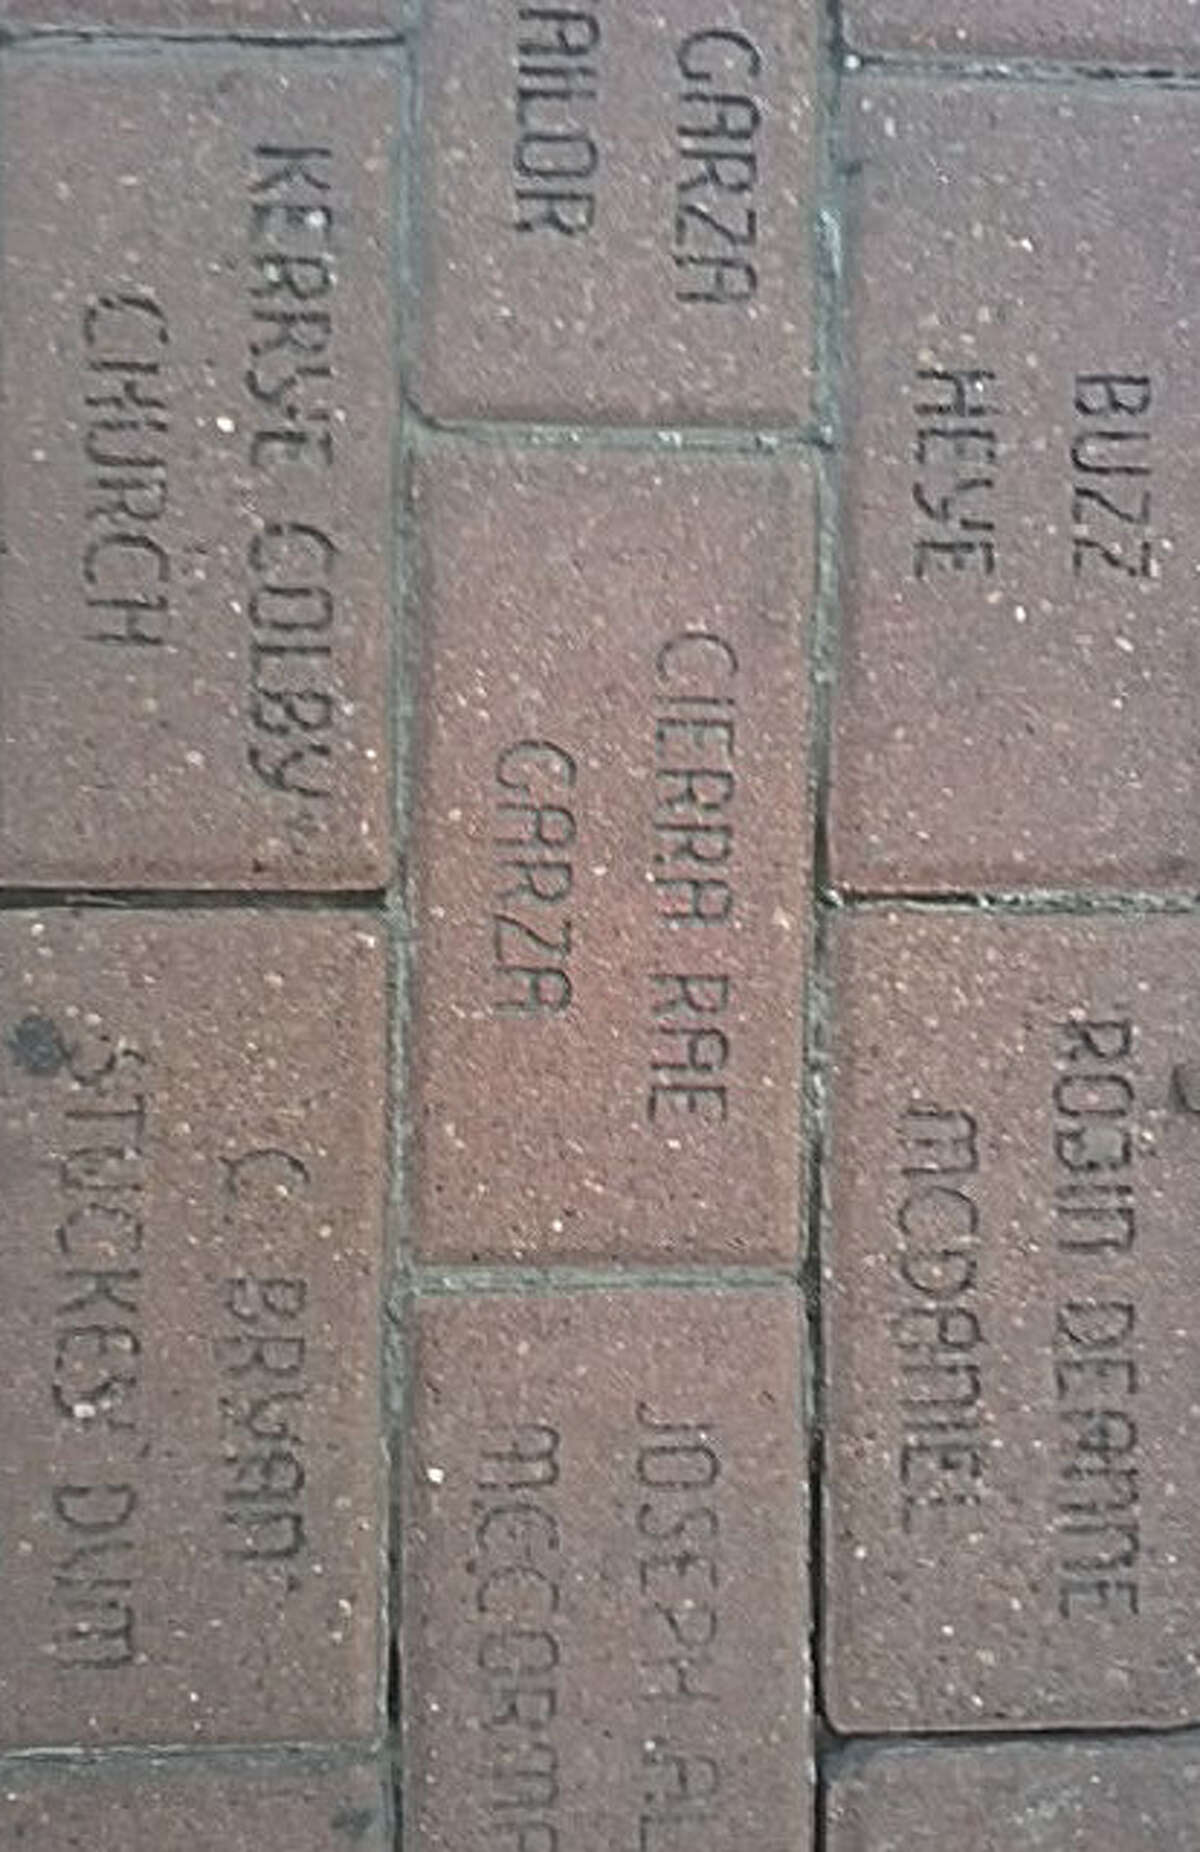 Personalized bricks raised money for downtown beautification projects.